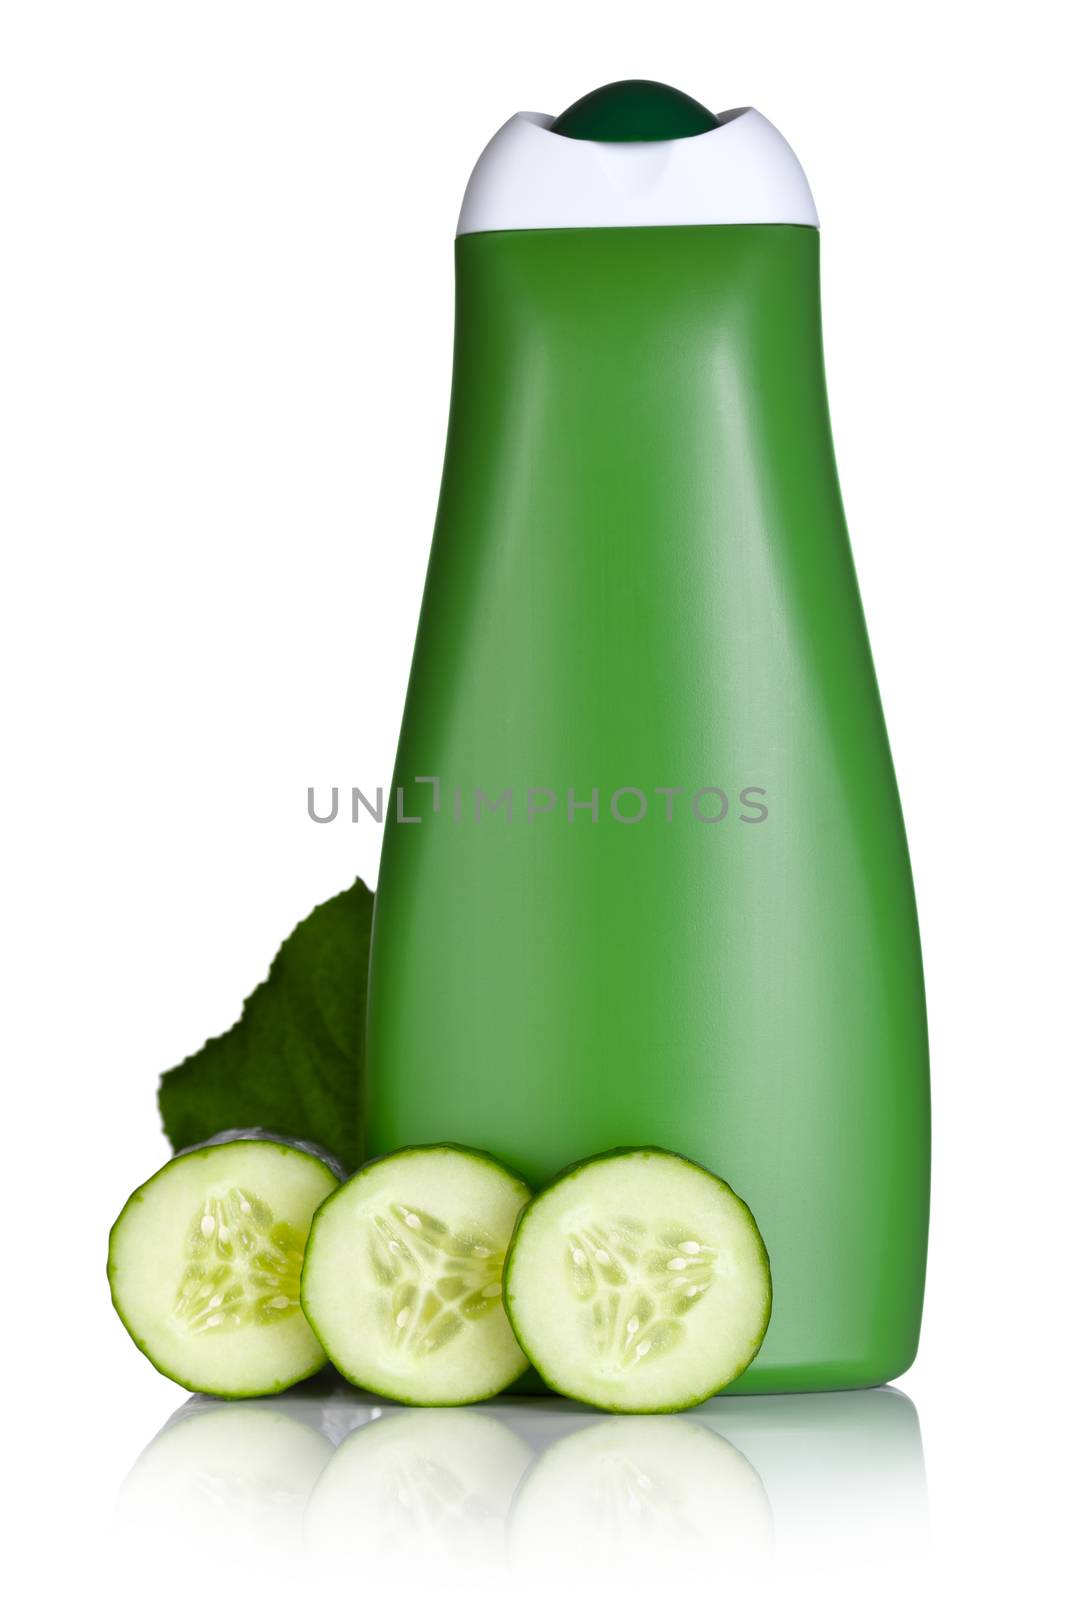 Cucumber shampoo with fresh cucumber slices and leaf on white background